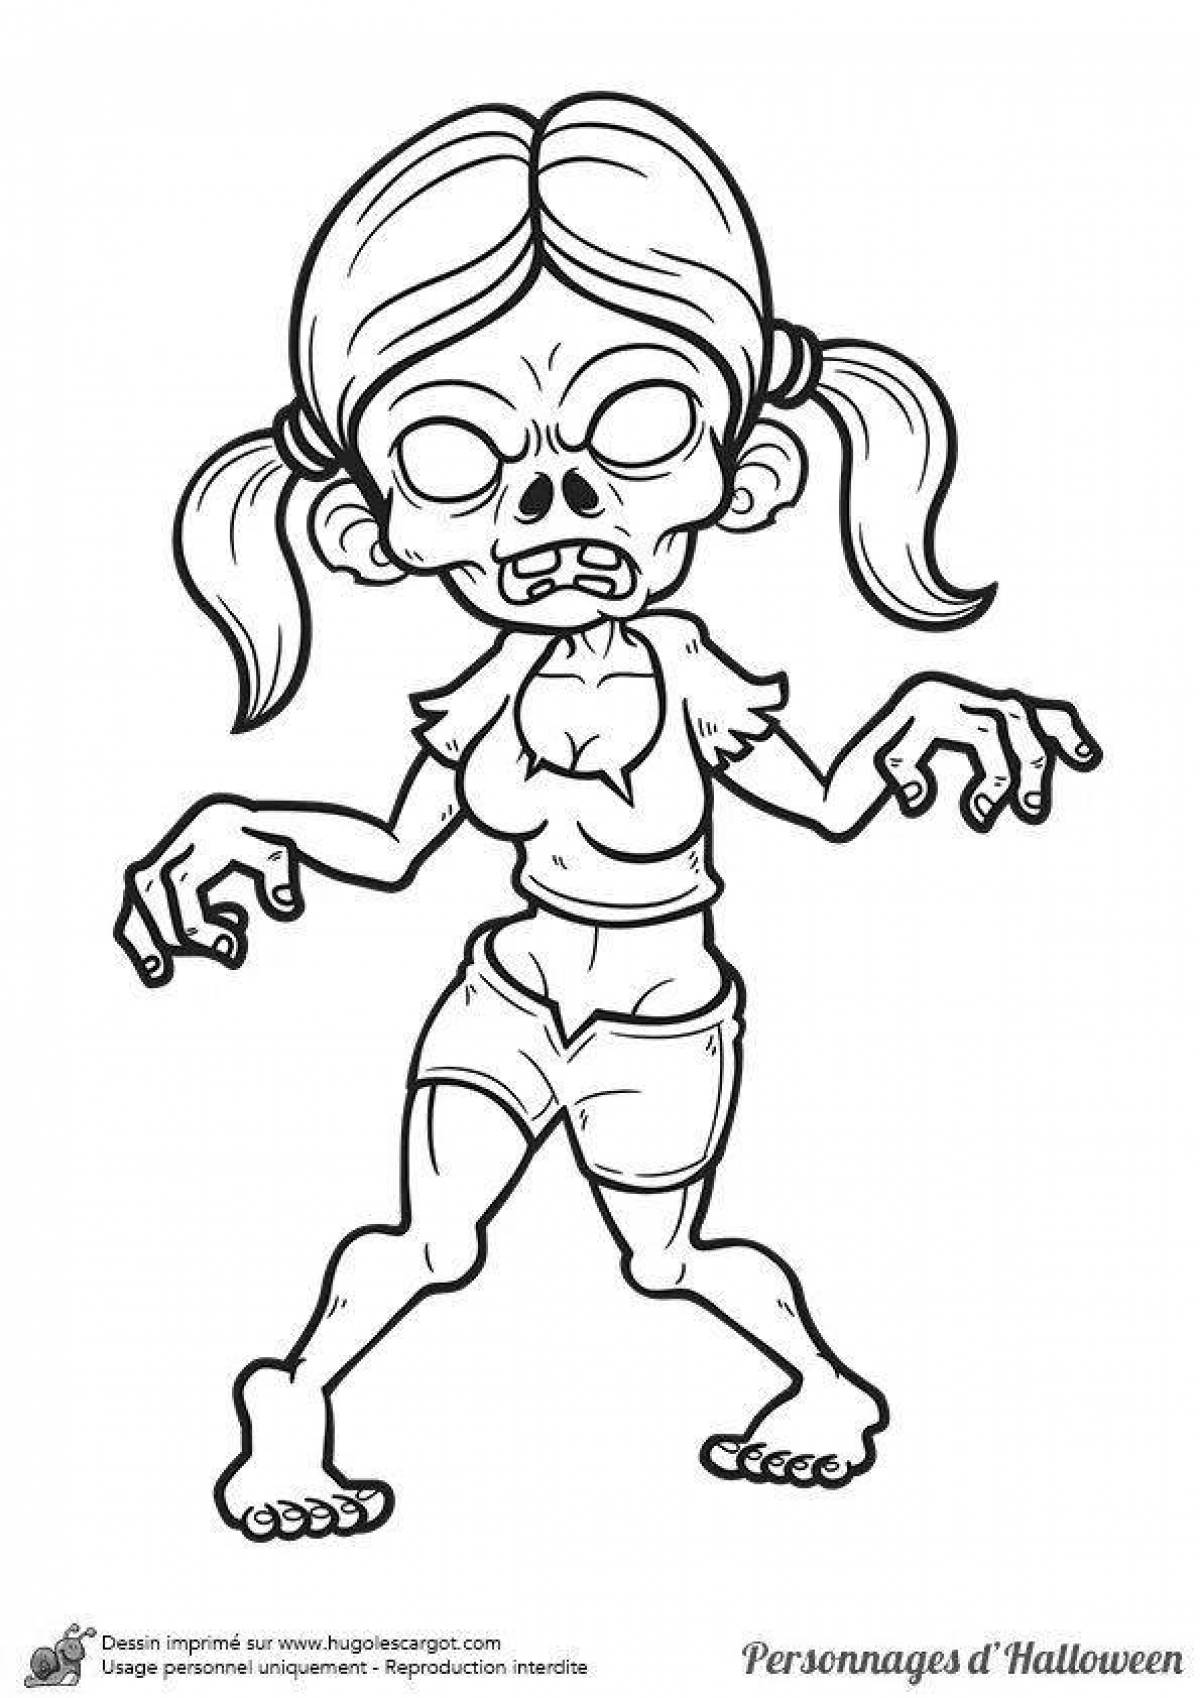 Scary horror coloring pages for kids